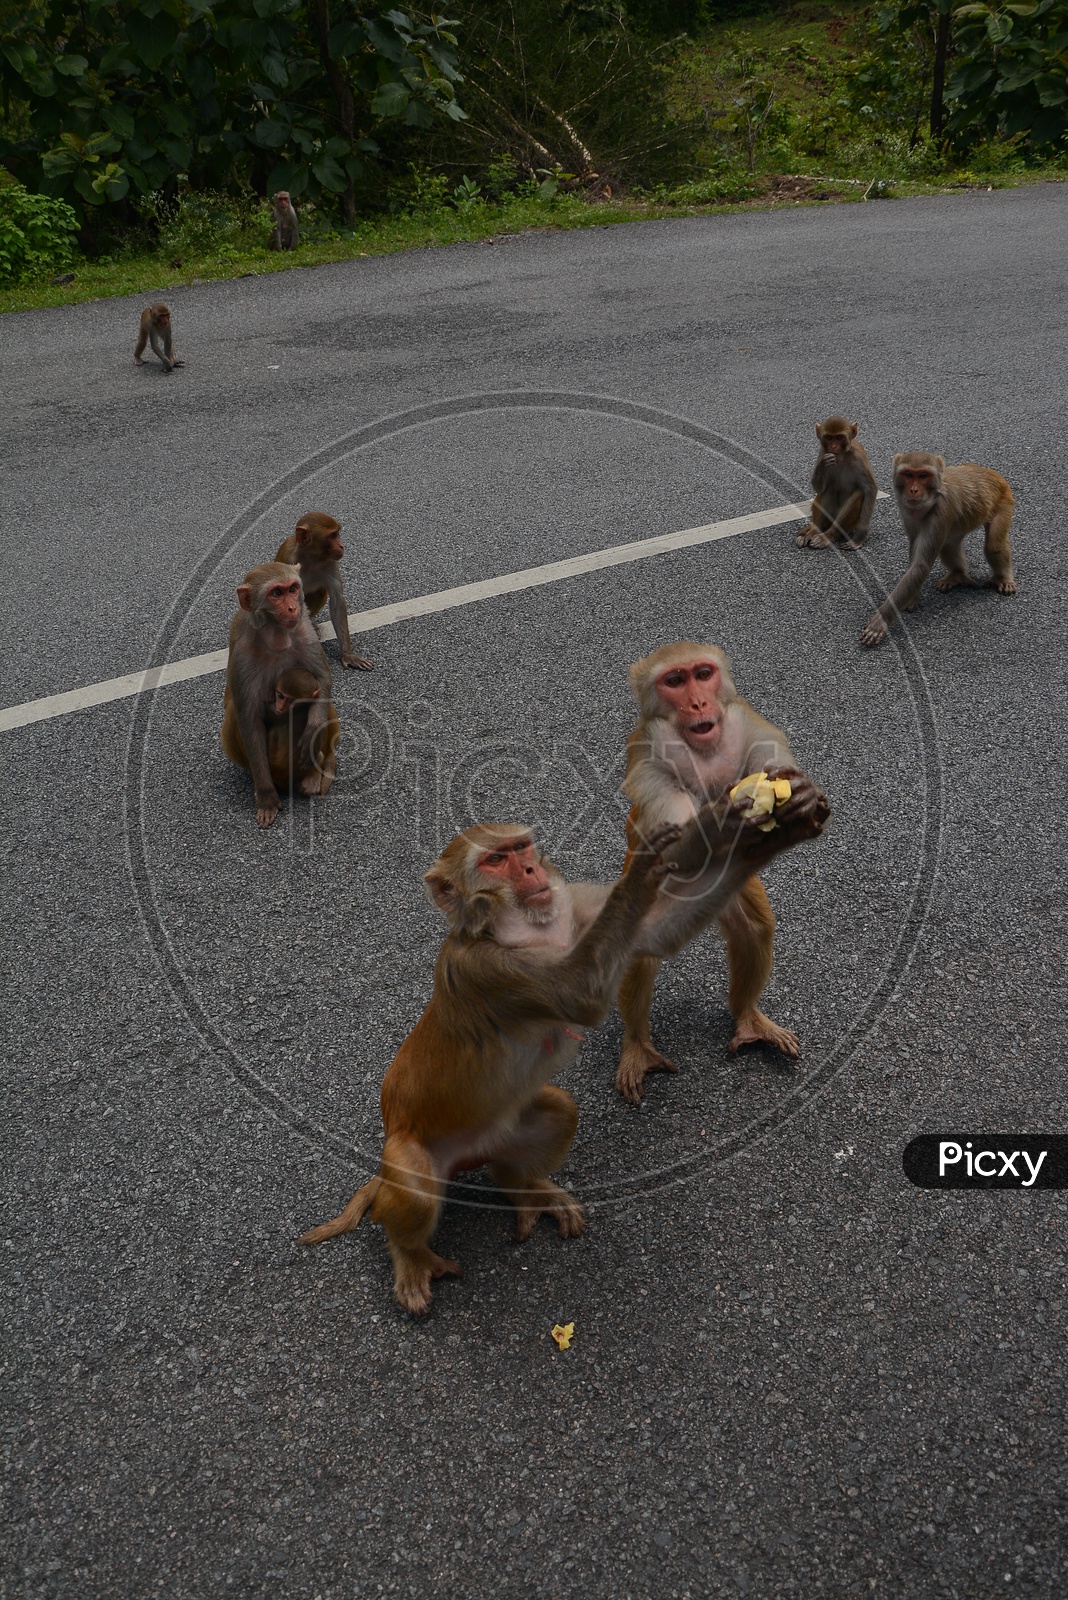 Indian Monkey Or Macaque  Feeding on Highway roads By Commuters